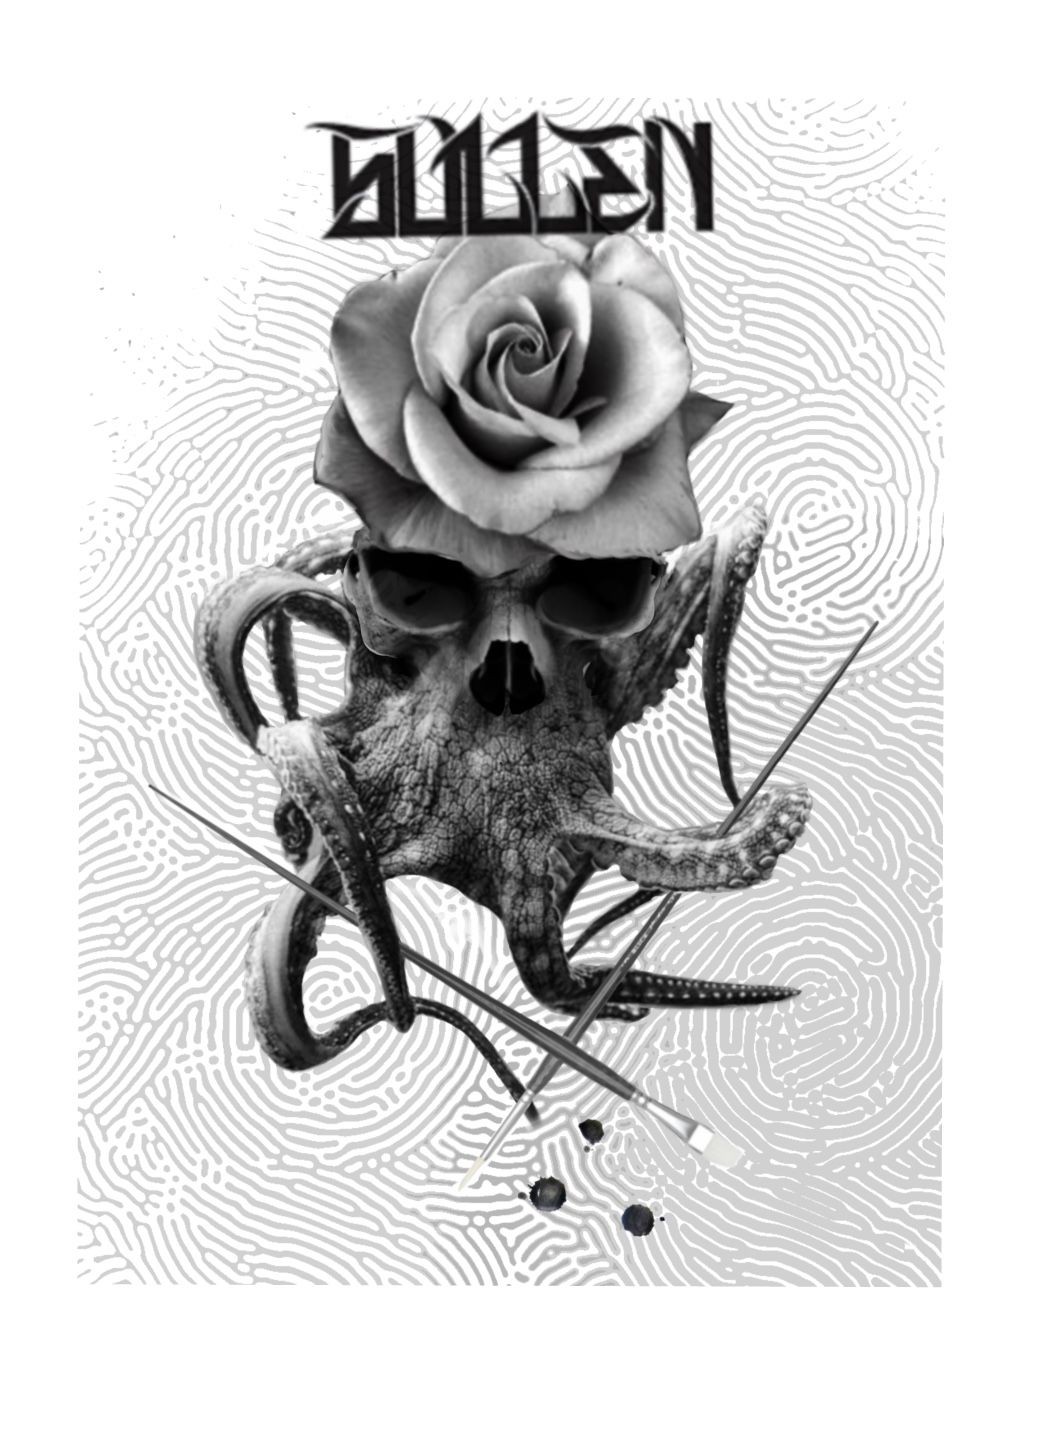 Rose skull he’d with octopus arms as mandible of skull holding paintbrushes. Sullen badge